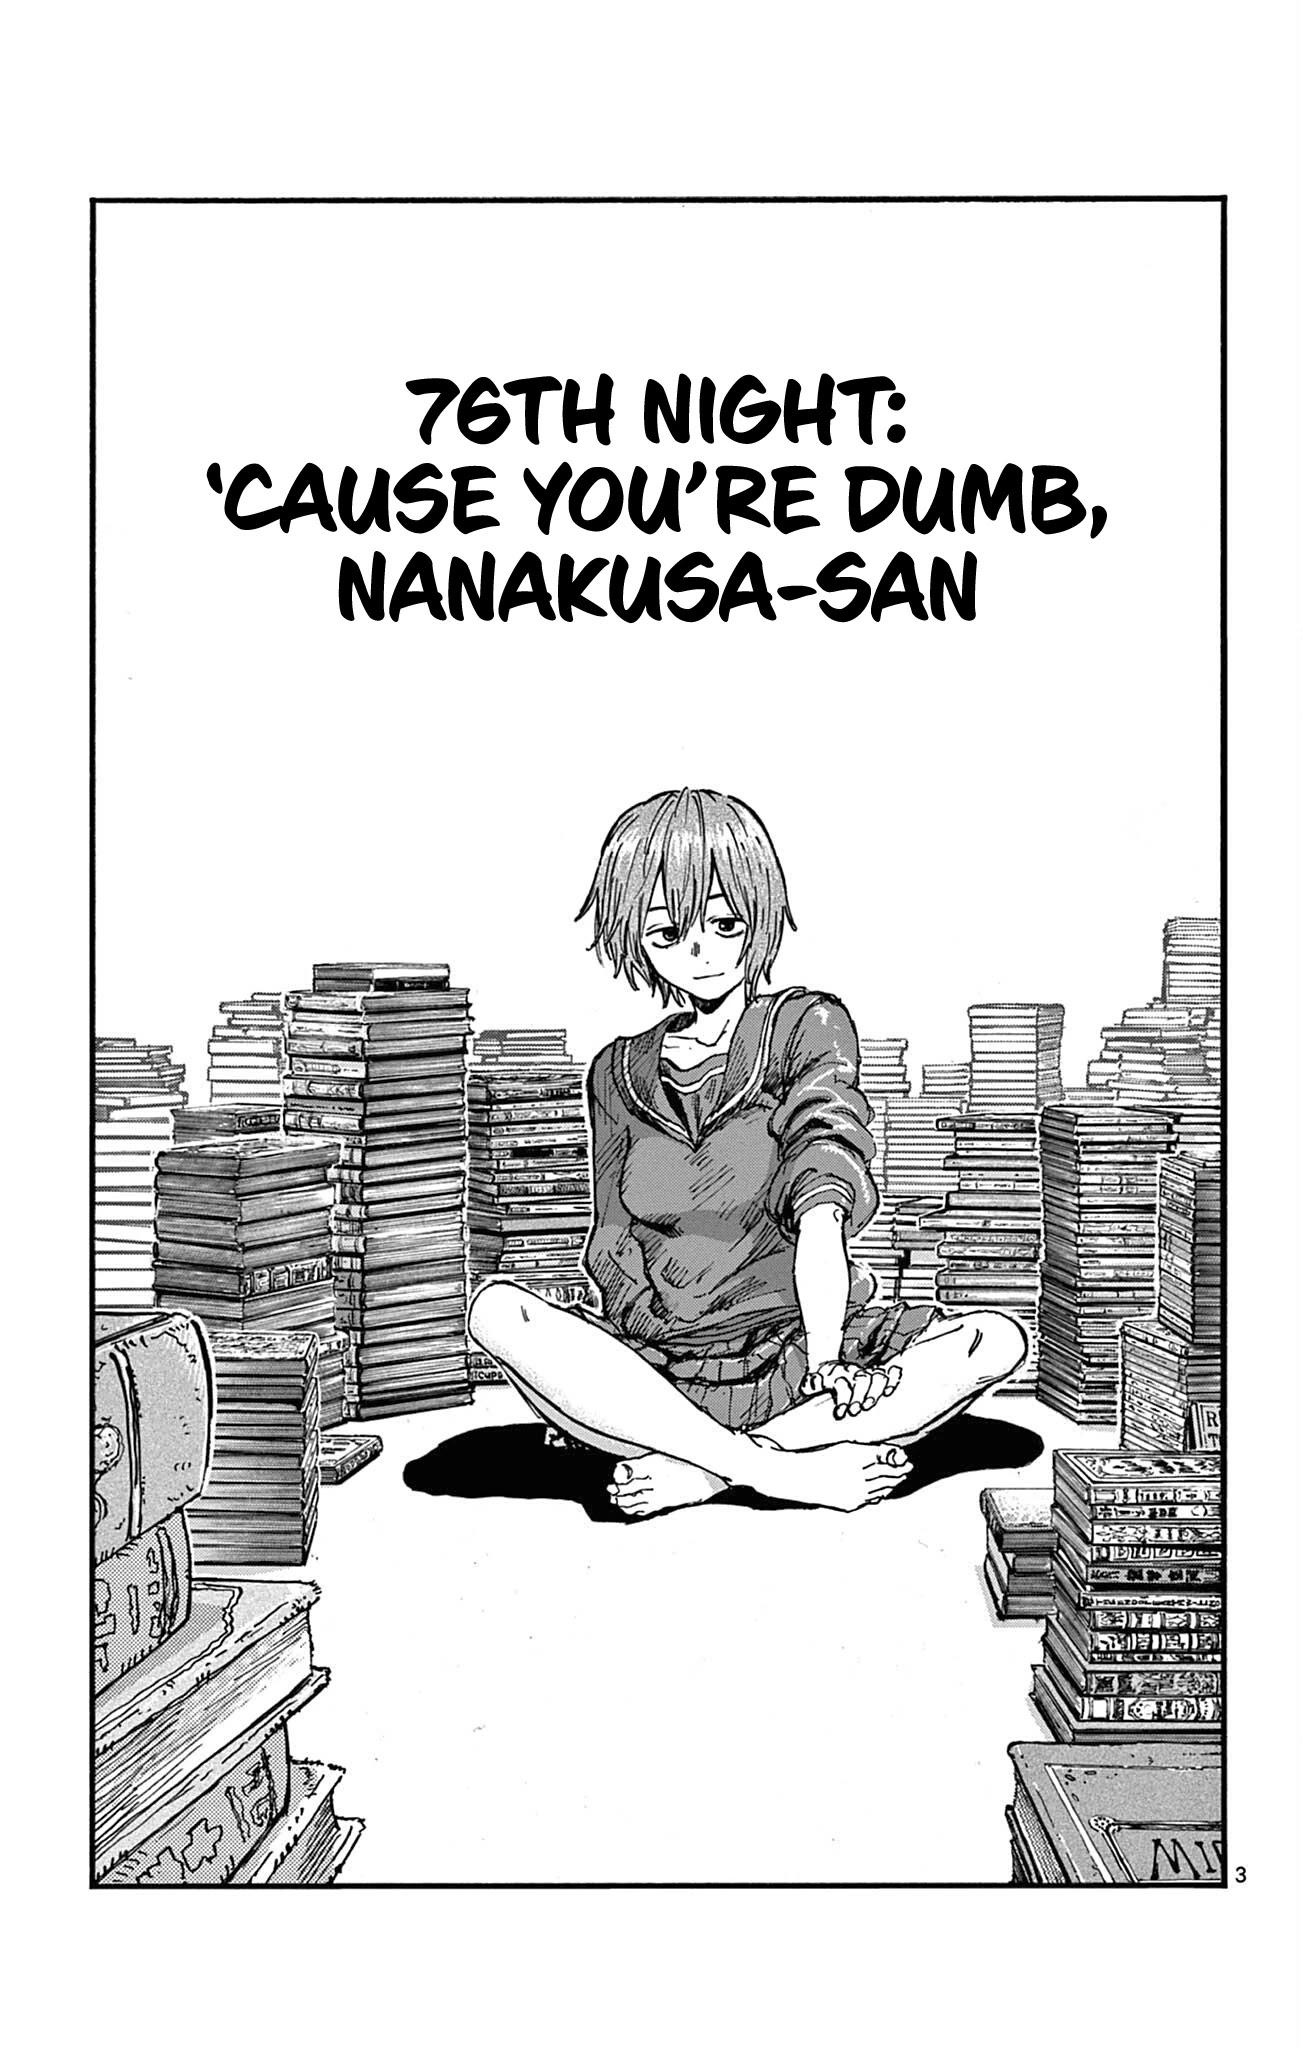 Read Song Of The Night Walkers Song Of The Night Walkers Chapter 76 : ‘Cause You’Re Dumb, Nanakusa-San 2